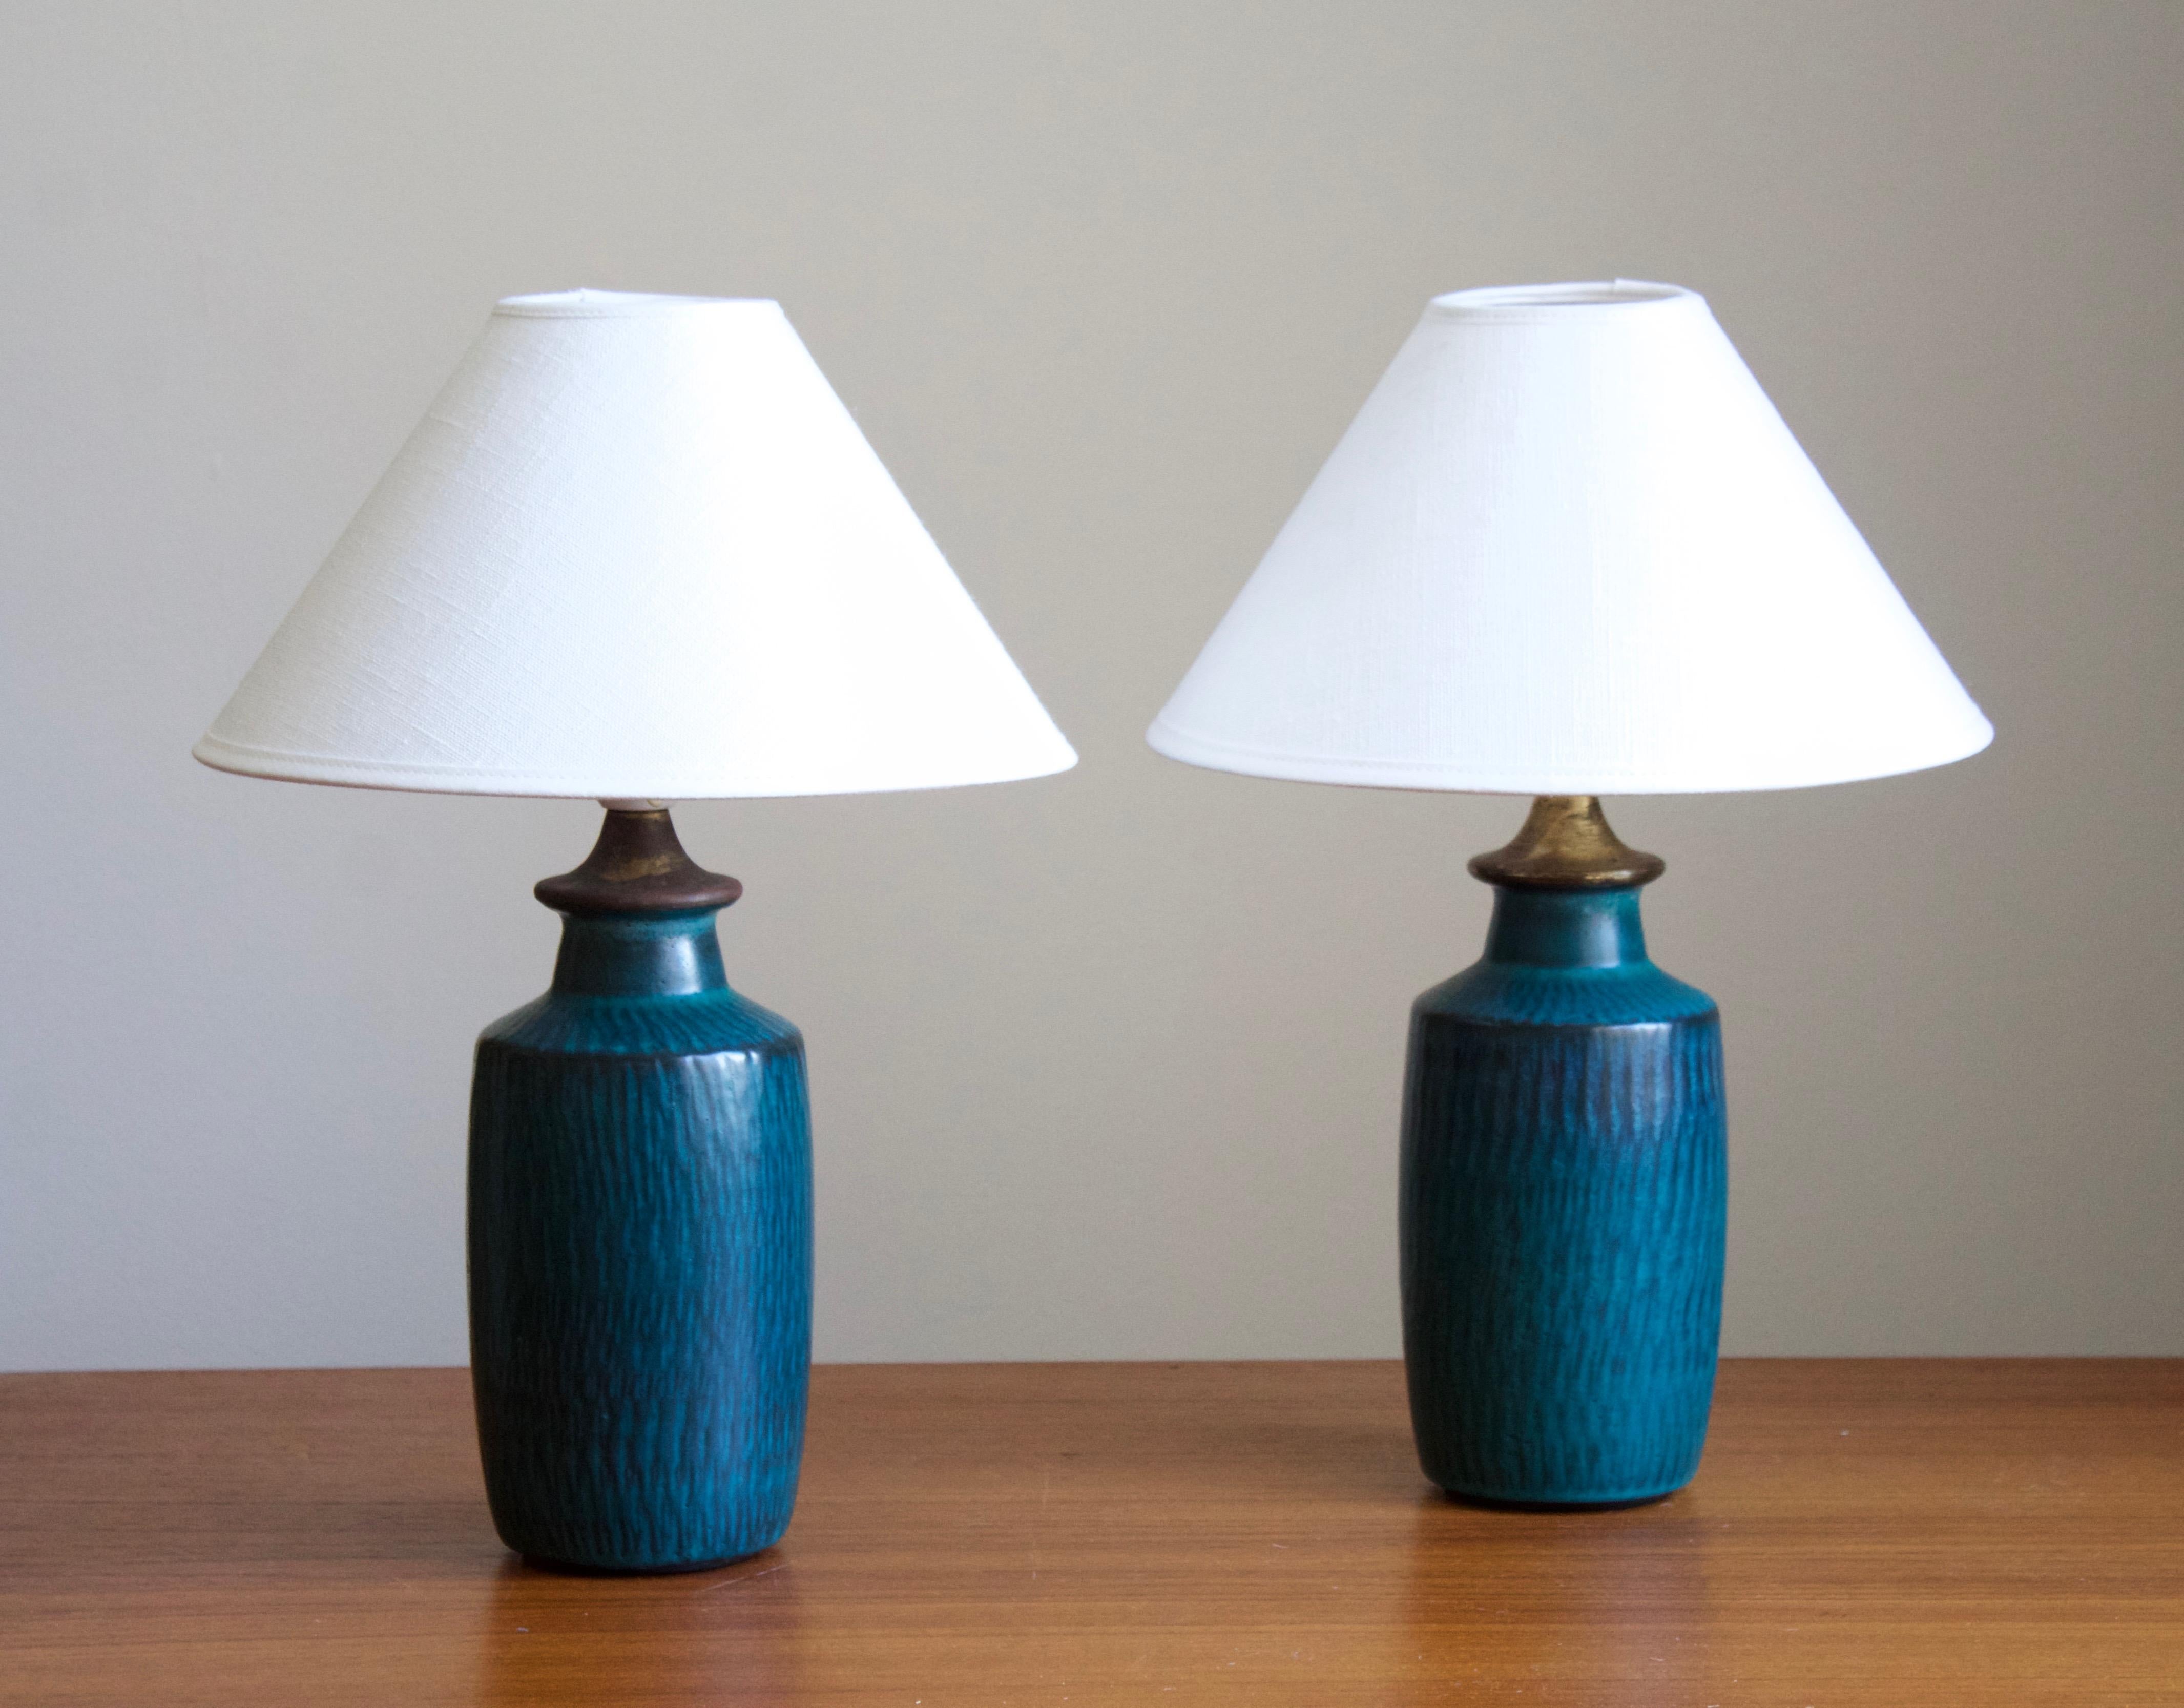 A pair of rare table lamps produced by Nymølle, Denmark, c. 1960s. Designed by Gunnar Nylund, (Swedish, 1914-1997). Signed.

Nylund served as artistic director at Rörstrands, where he worked 1931-1955. Prior to his work at Rörstrand he was a